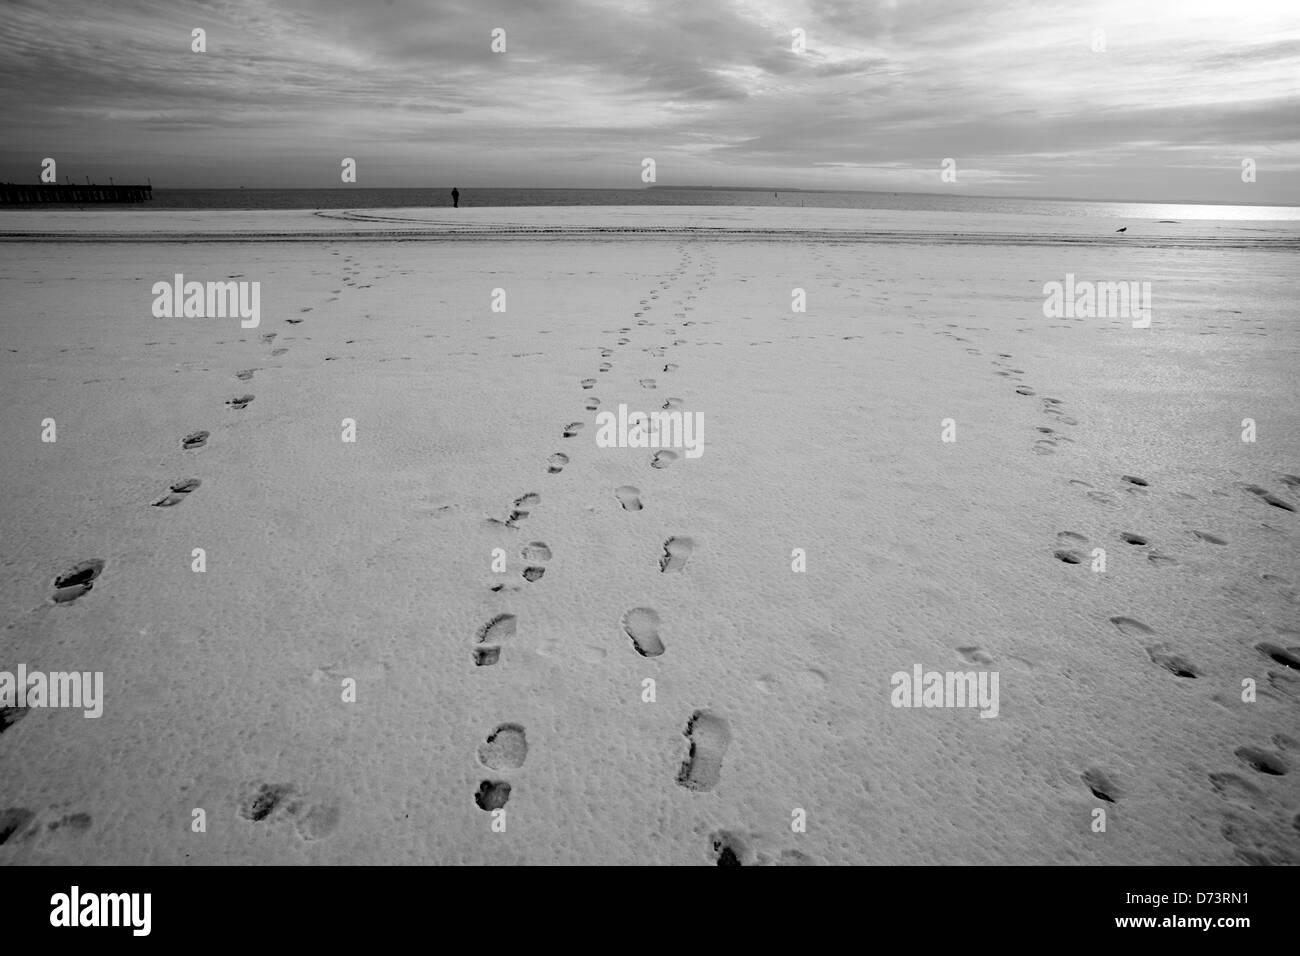 Snowy landscape, snow, clouds, landscape, sadness, footprints, footprints in the snow, ocean, sea, Coney Island Stock Photo